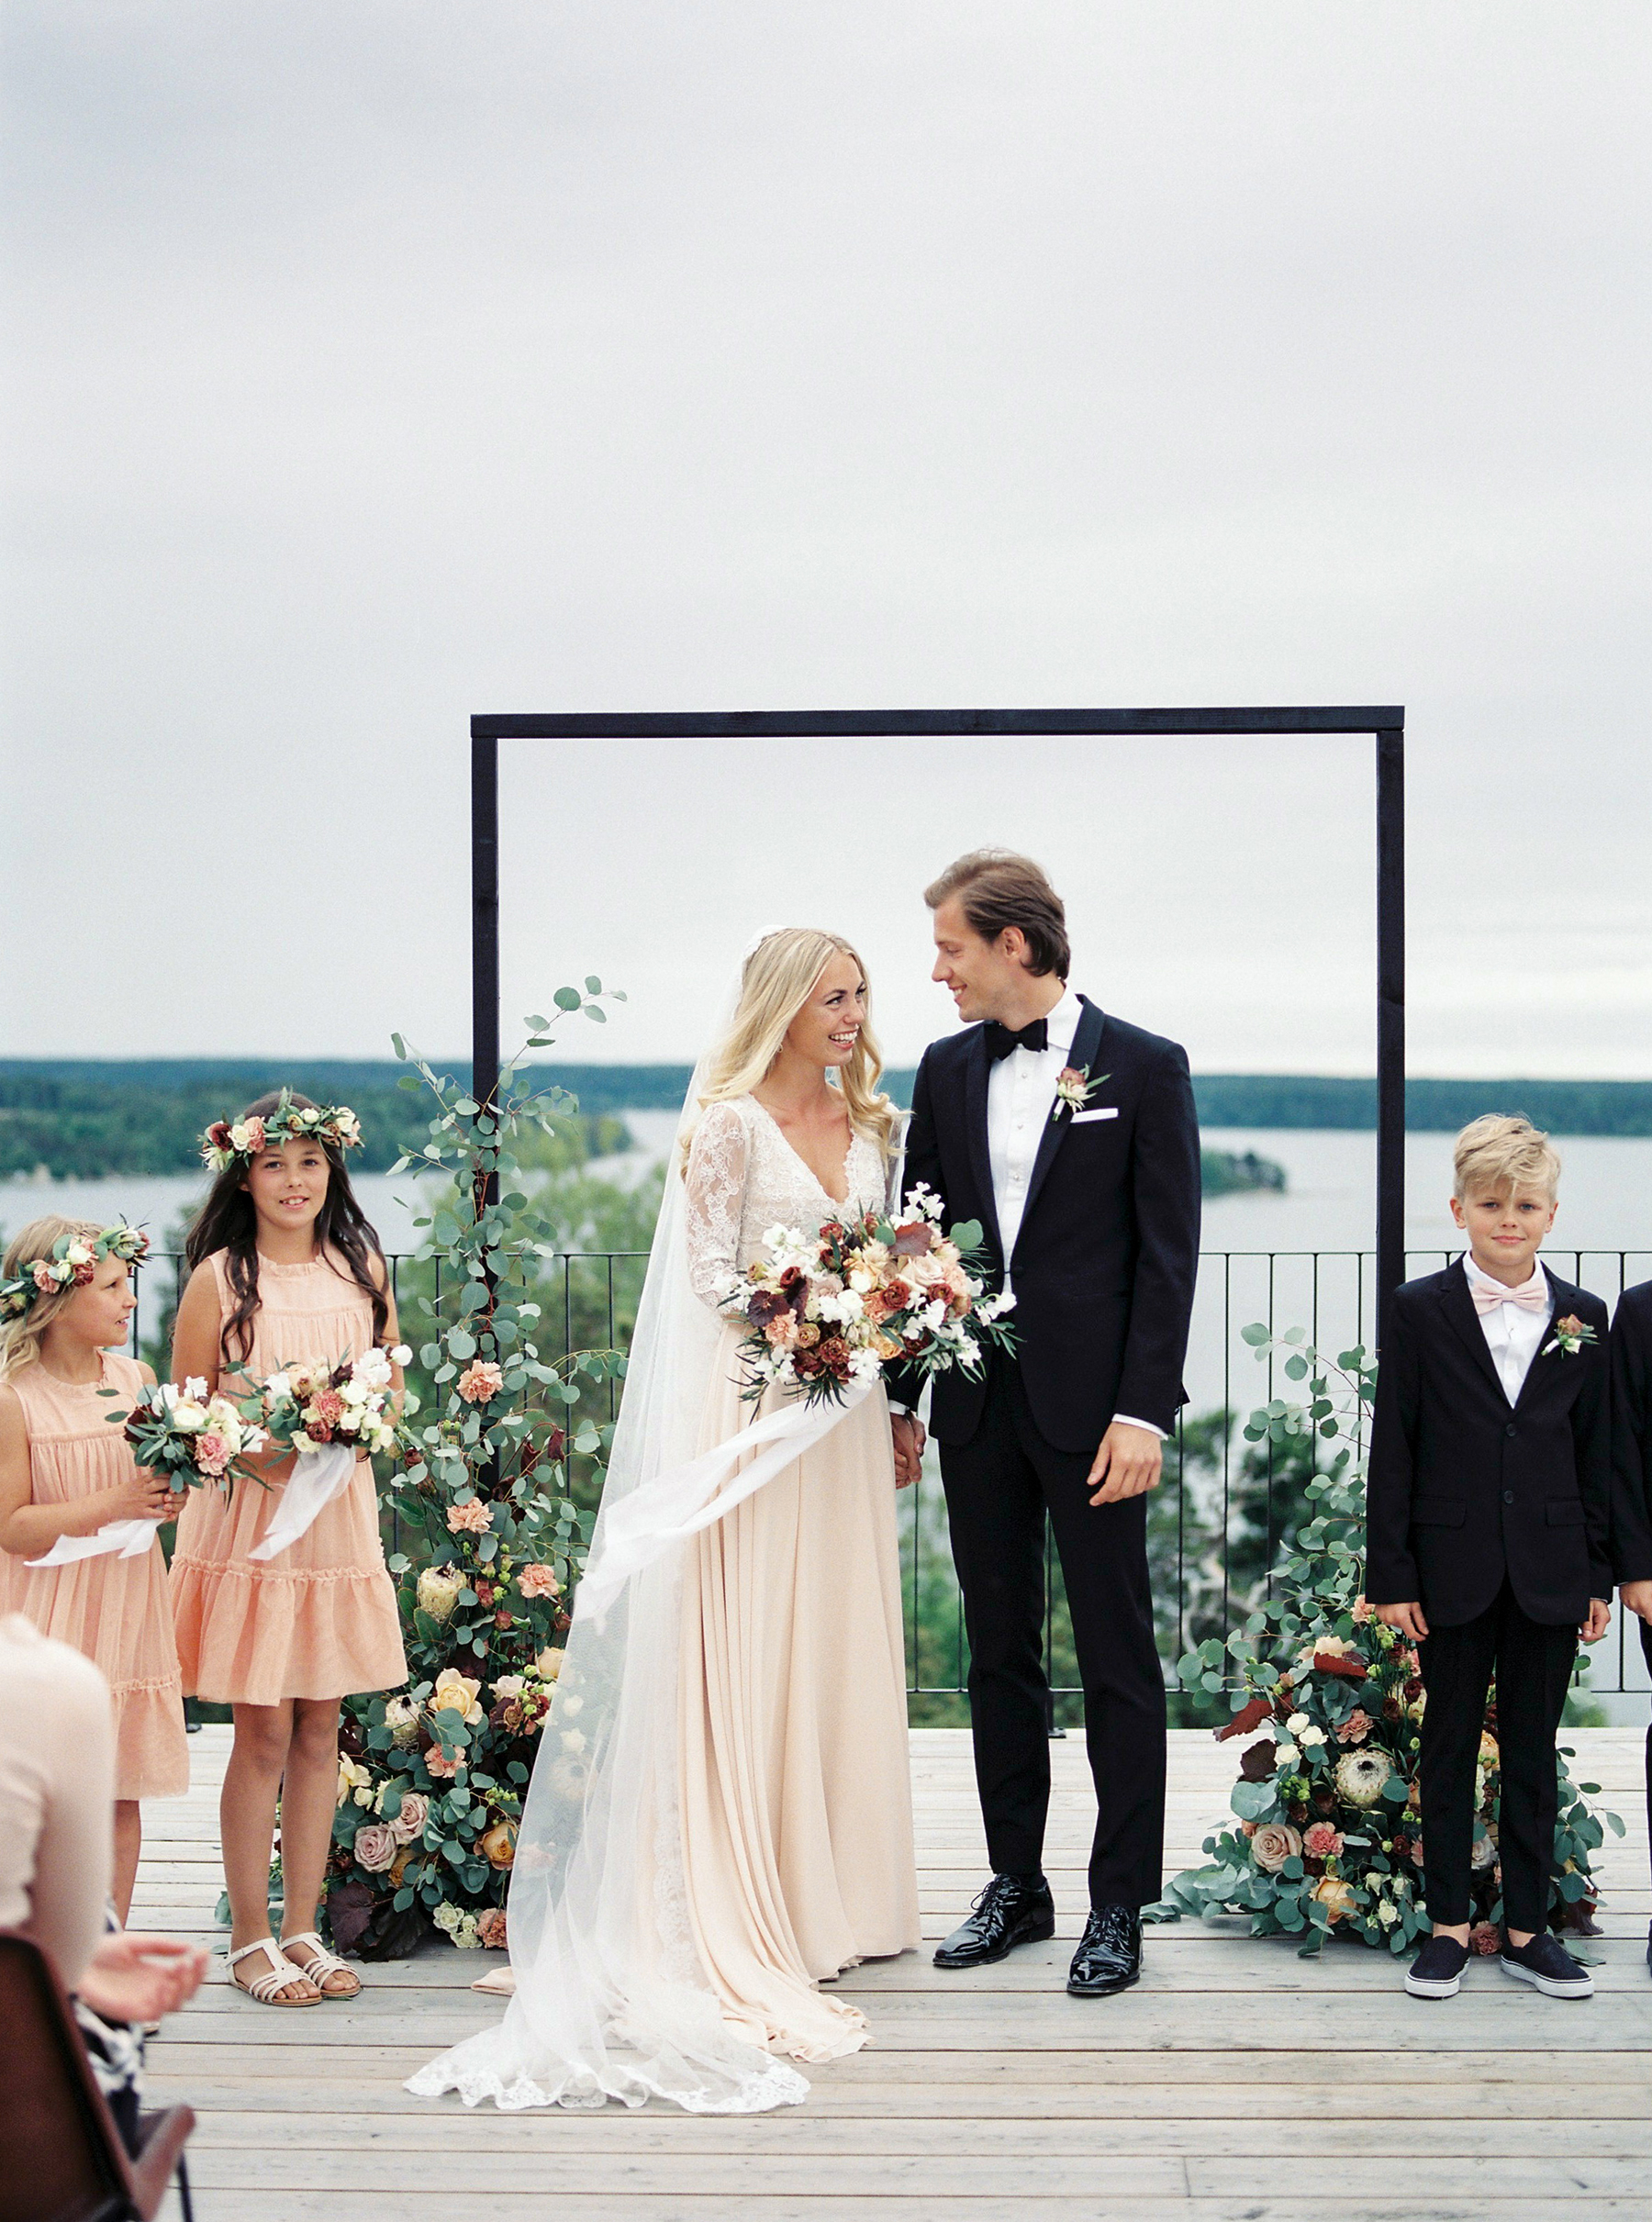 Bright and Warm Colored Wedding Inspiration in Sweden 2 Brides Photography12